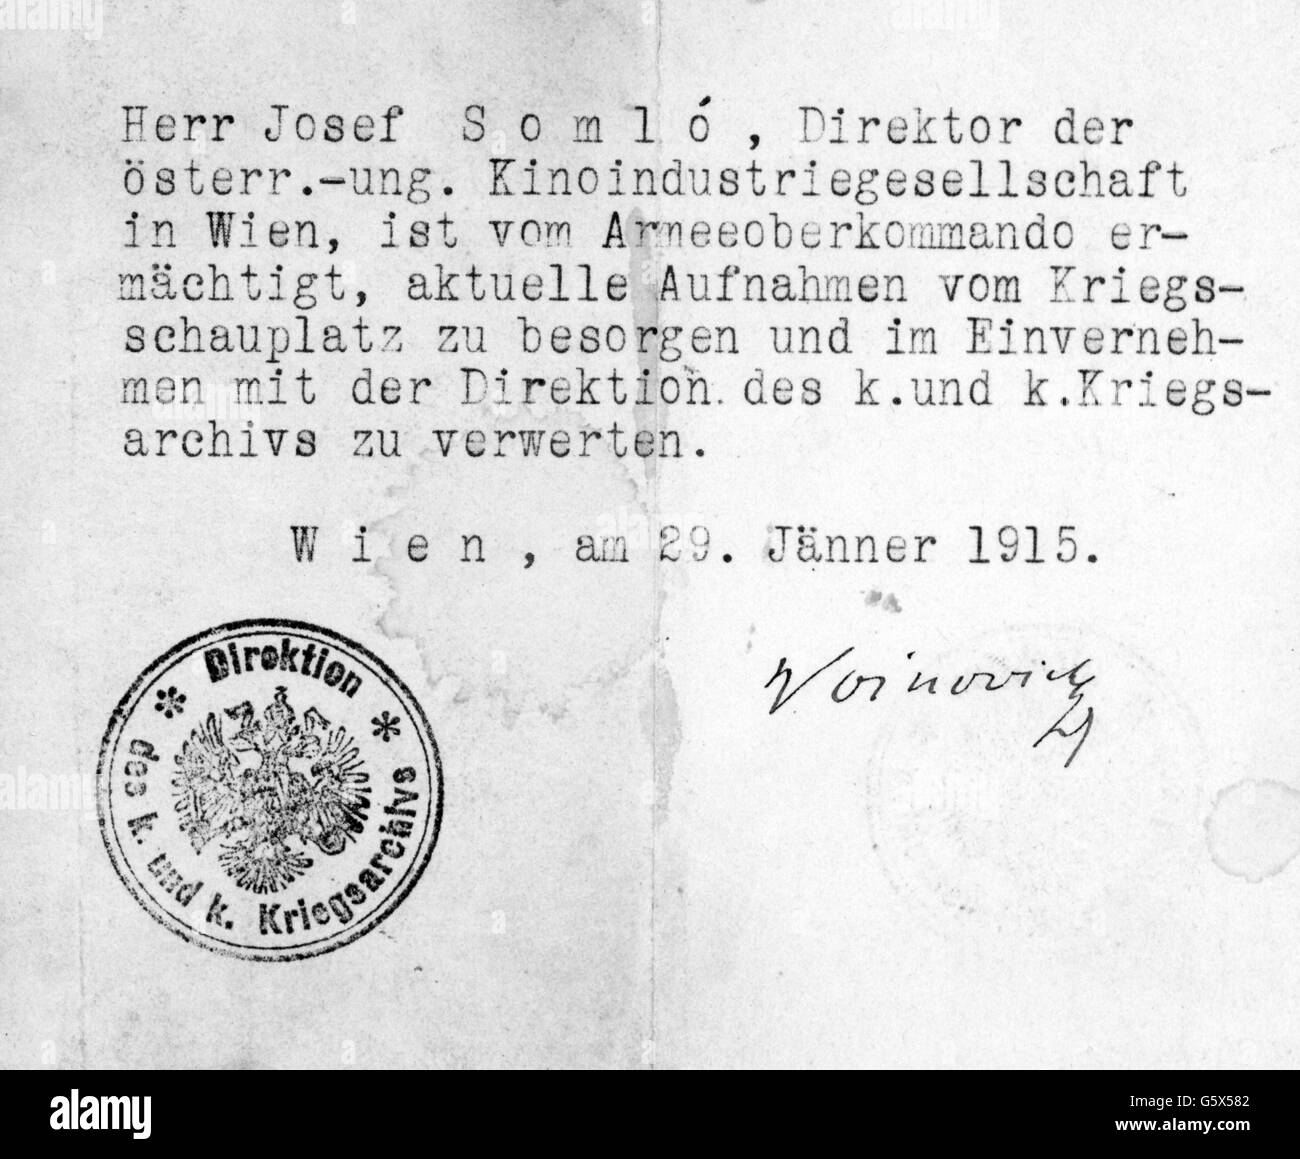 Somlo, Josef, 5.10.1884 - 29.11.1973, Hungarian producer, permission for procurement and utilization of war imagery, issued by the Imperial and Royal War Archive, Vienna, 29.1.1915, Stock Photo